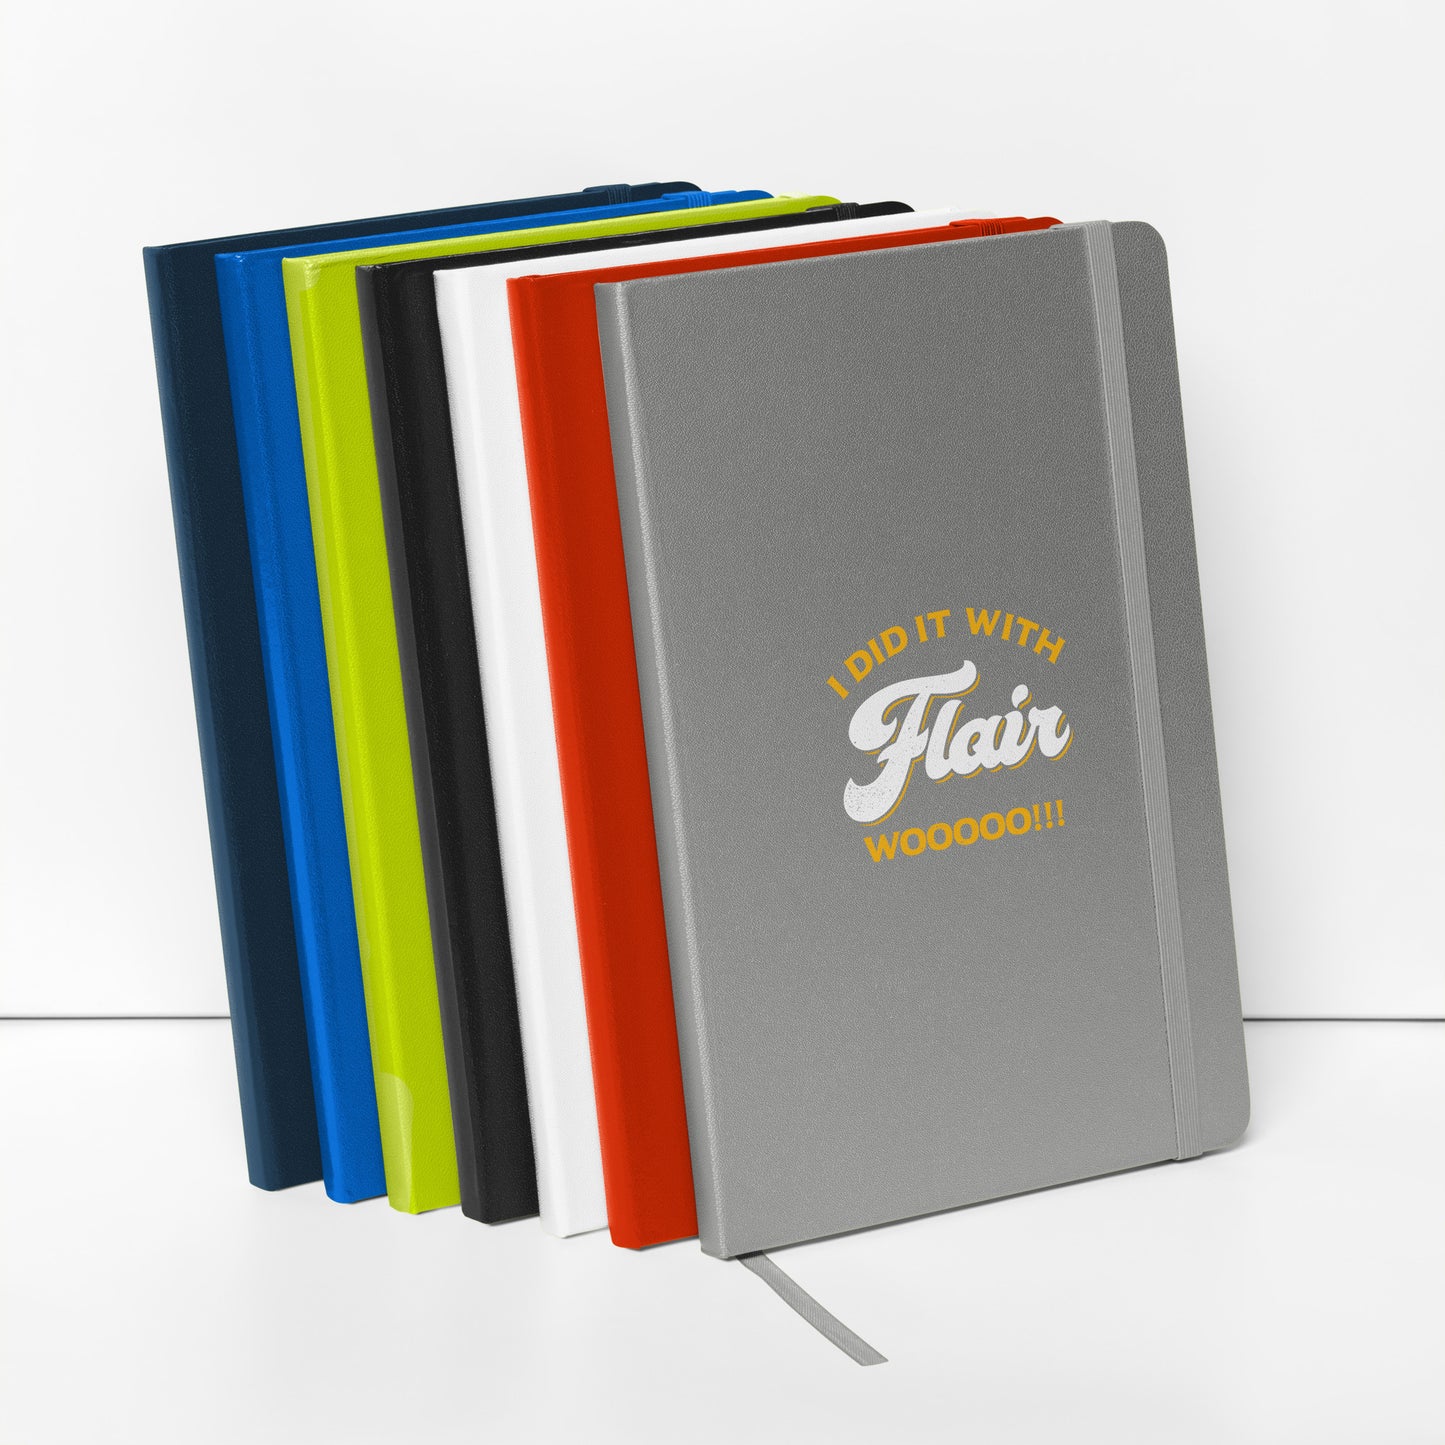 Flair Hardcover bound notebook